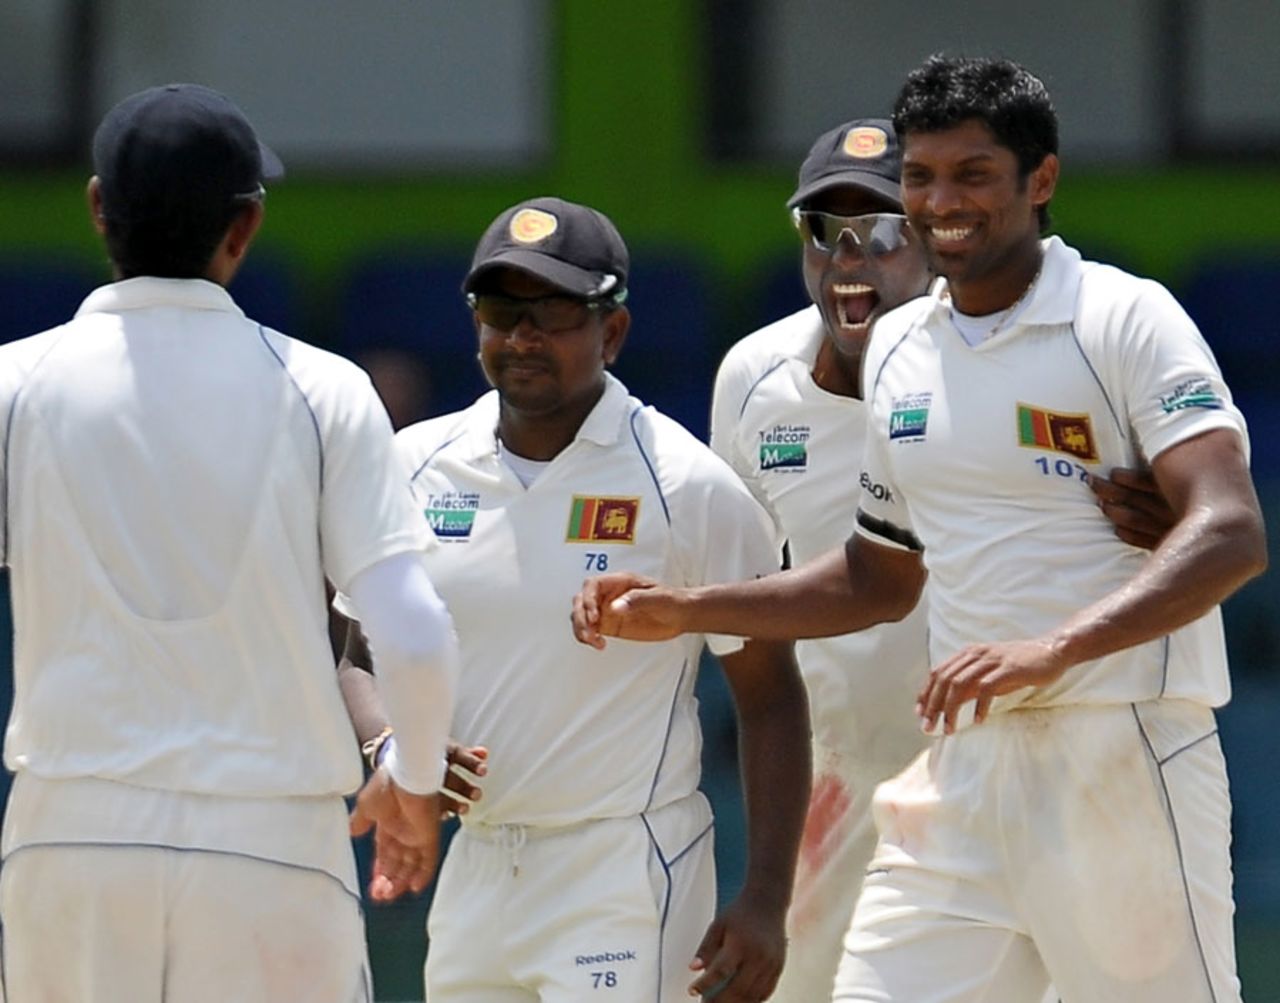 Chanaka Welegedara dismissed Mitchell Johnson and Peter Siddle off consecutive deliveries, Sri Lanka v Australia, 3rd Test, SSC, Colombo, 2nd day, September 17, 2011